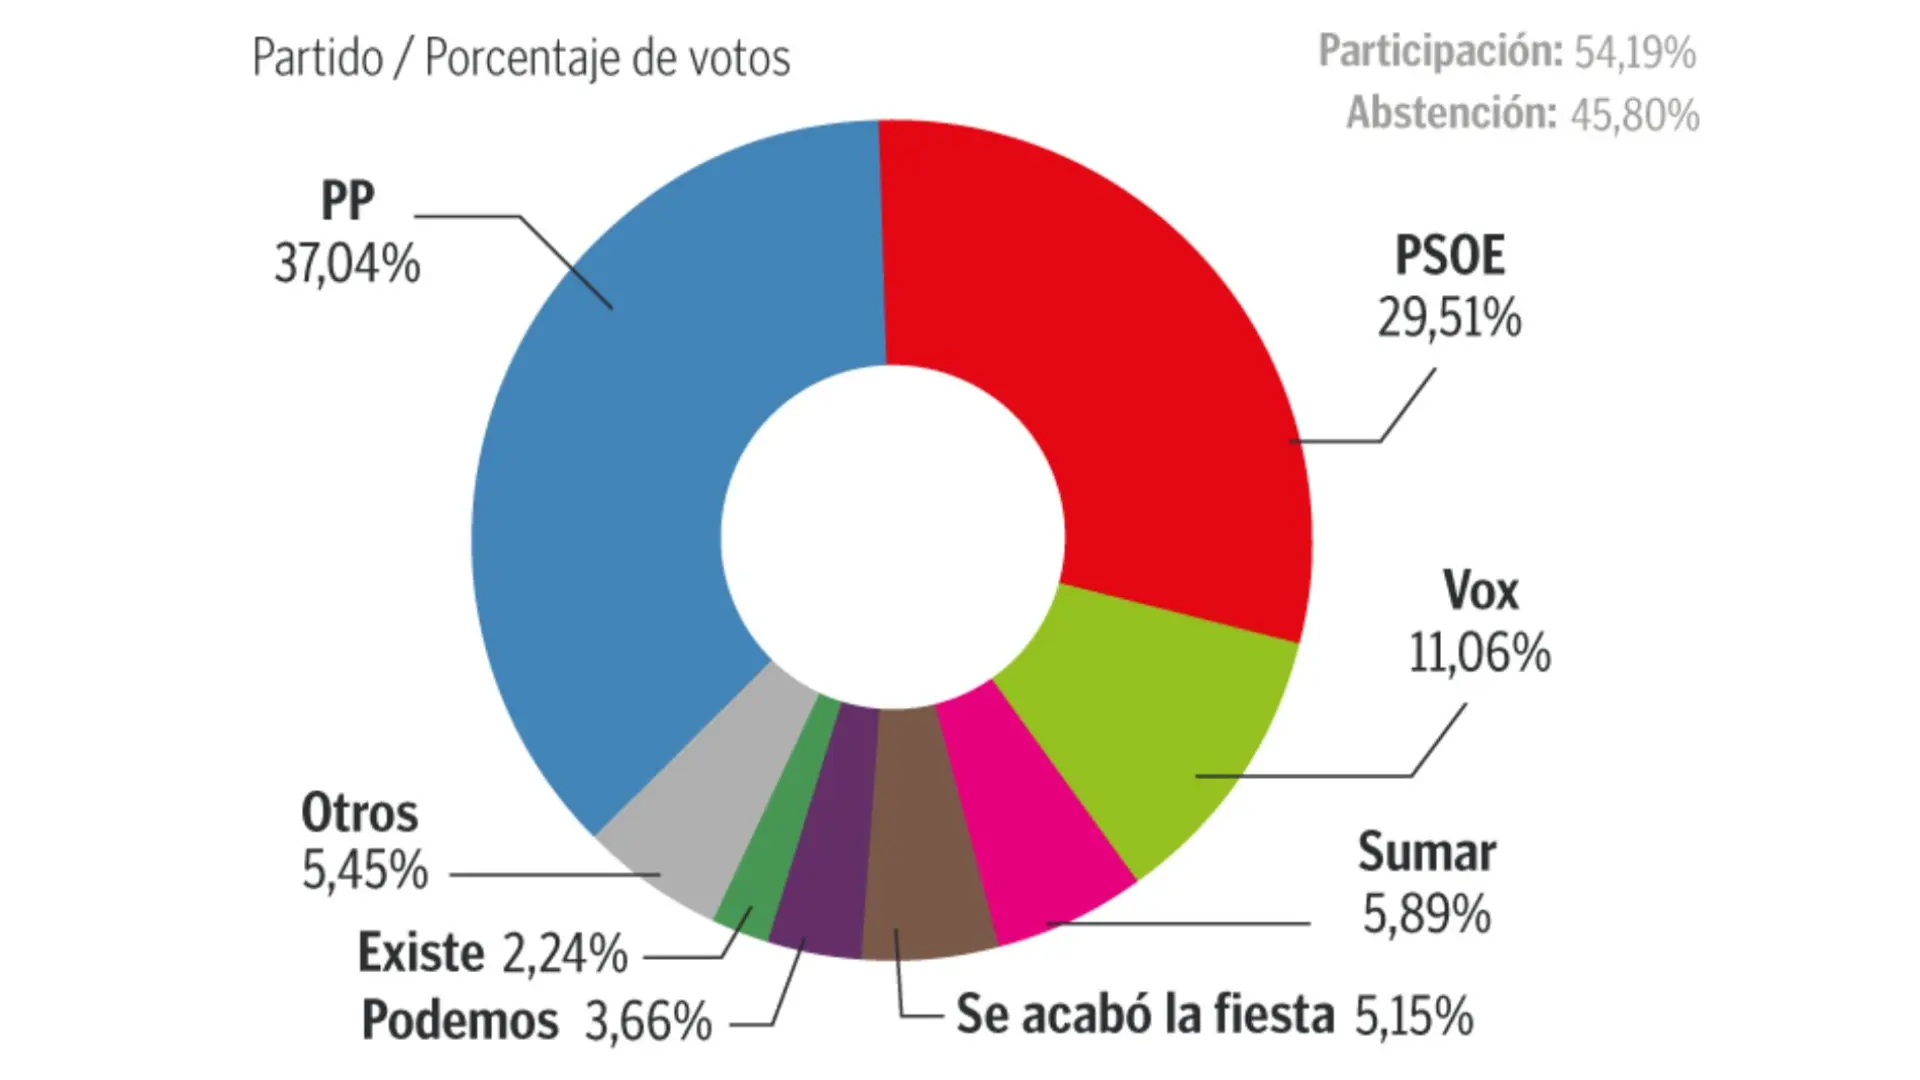 The PP lost Zaragoza, the PSOE lost 30,000 votes, Vox came third and Sumar defeated Podemos